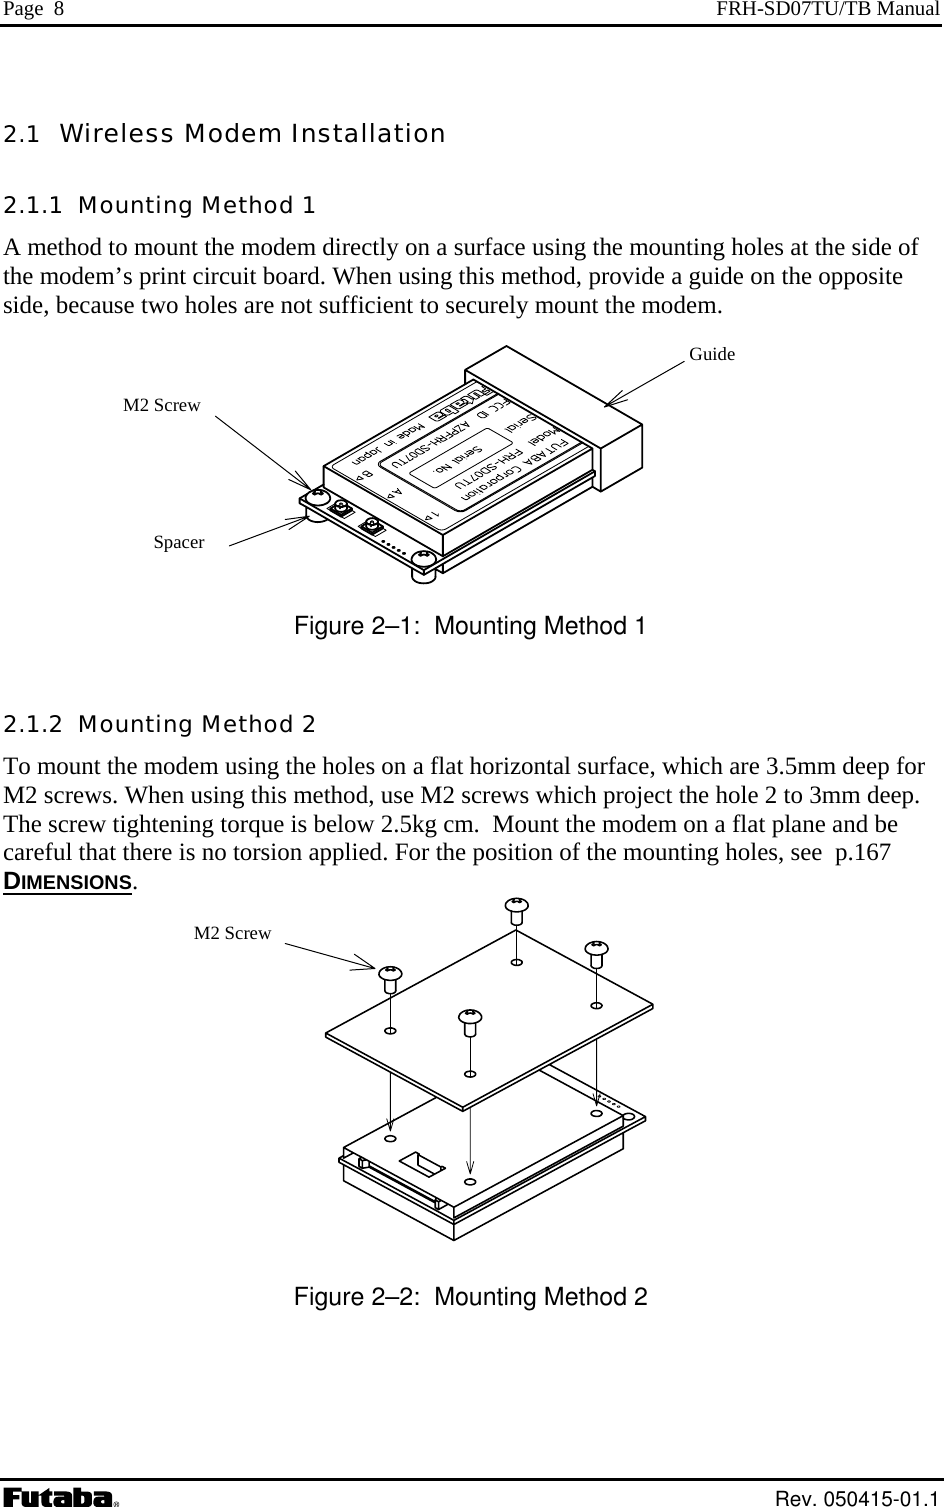 Page  8  FRH-SD07TU/TB Manual 2.1  Wireless Modem Installation 2.1.1  Mounting Method 1 A method to mount the modem directly on a surface using the mounting holes at the side of the modem’s print circuit board. When using this method, provide a guide on the opposite side, because two holes are not sufficient to securely mount the modem.  S Figure 2–1:  Mounting Method 1 2.1.2  Mounting Method 2 To mount the modem using the holes on a flat horizontal surface, which are 3.5mm deep for M2 screws. When using this method, use M2 screws which project the hole 2 to 3mm deep. The screw tightening torque is below 2.5kg cm.  Mount the modem on a flat plane and be careful that there is no torsion applied. For the position of the mounting holes, see  p.167 DIMENSIONS. pacer M2 Screw  Guide M2 Screw   Figure 2–2:  Mounting Method 2   Rev. 050415-01.1 